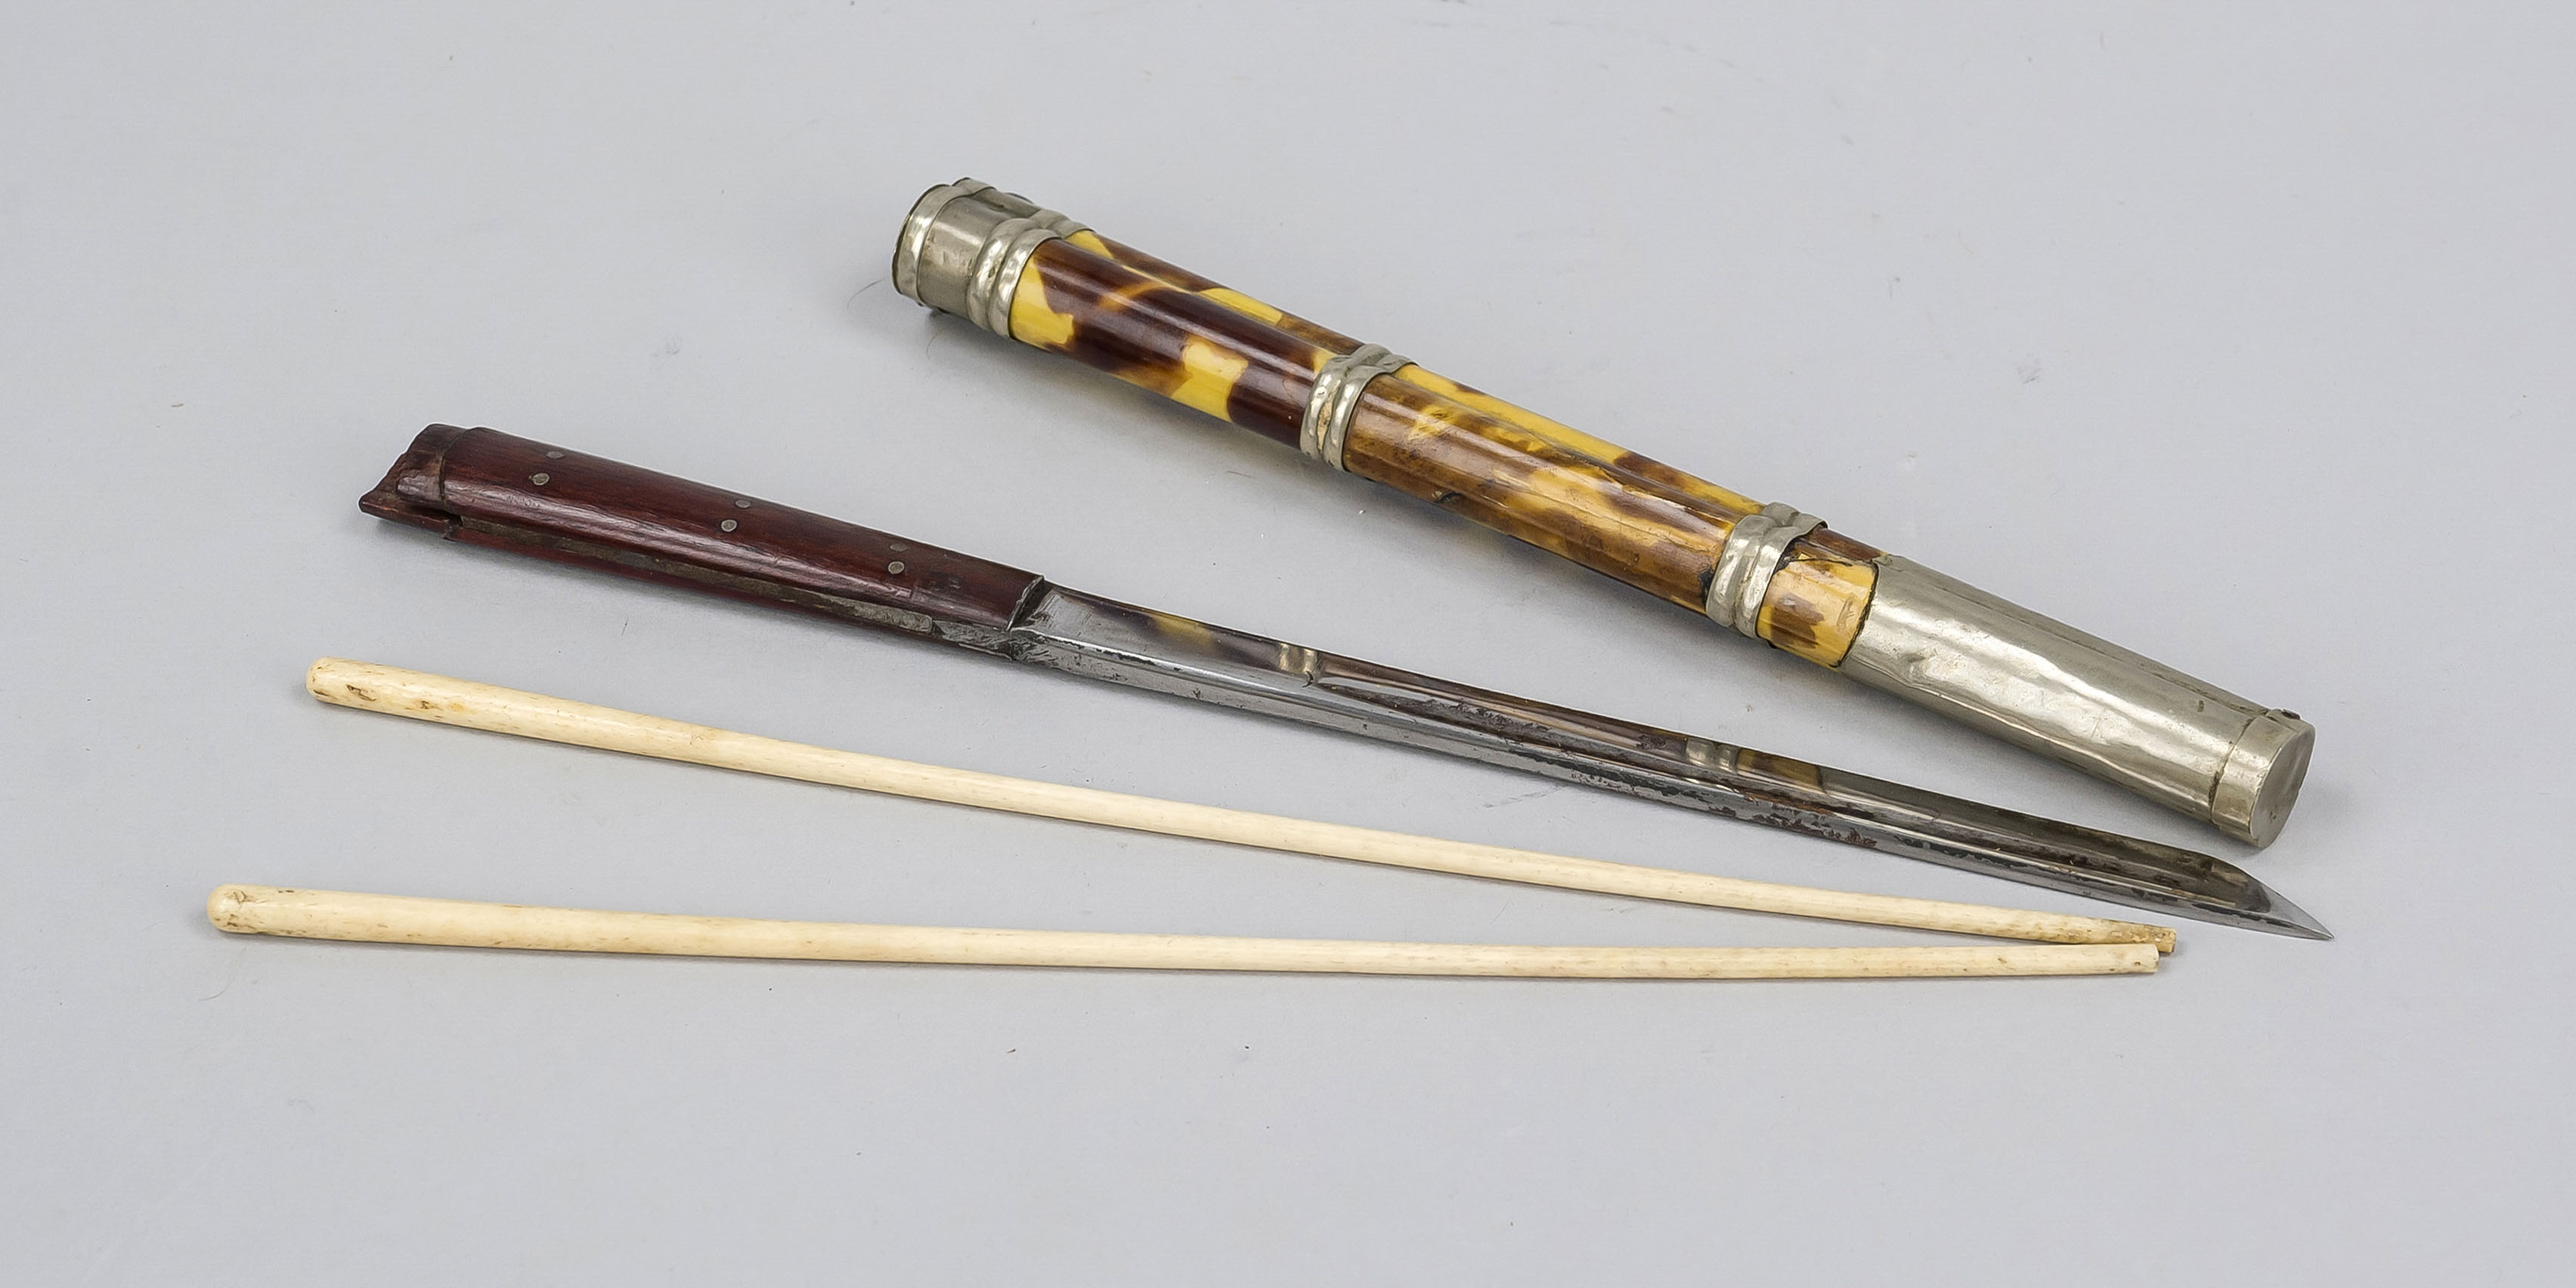 Travel cutlery, China, late 19th century (late Qing). Consisting of a pair of bone chopsticks and